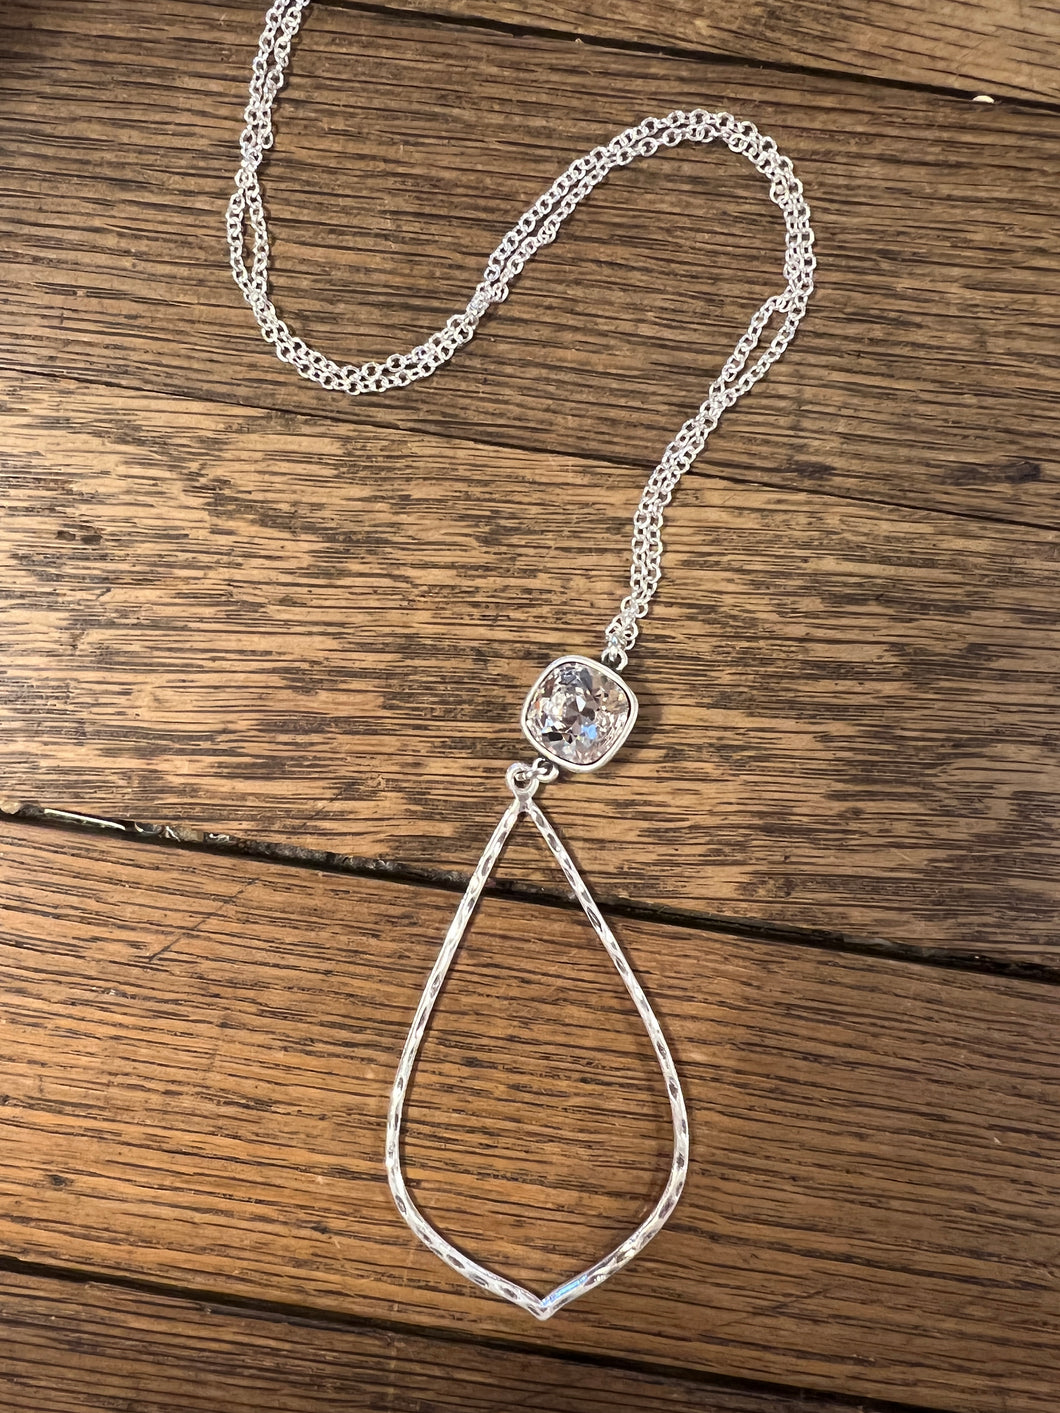 Silver Chain Teardrop Necklace with Clear Cushion Cut Stone